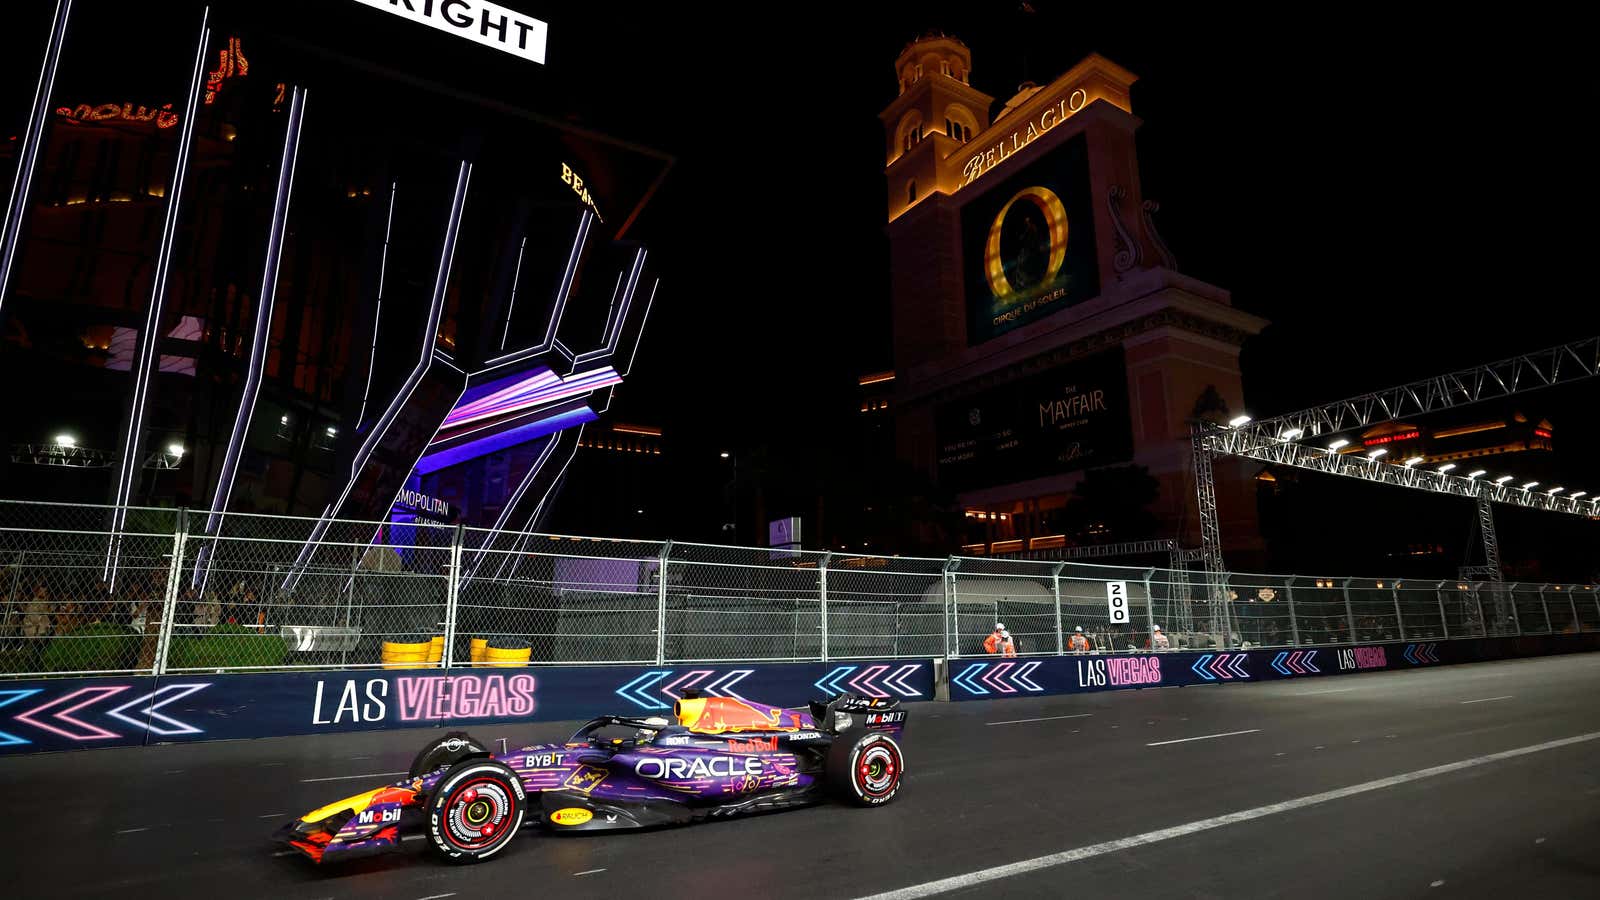 Formula 1's Las Vegas Grand Prix Proved The Doubters Wrong But There's Still Work To Do